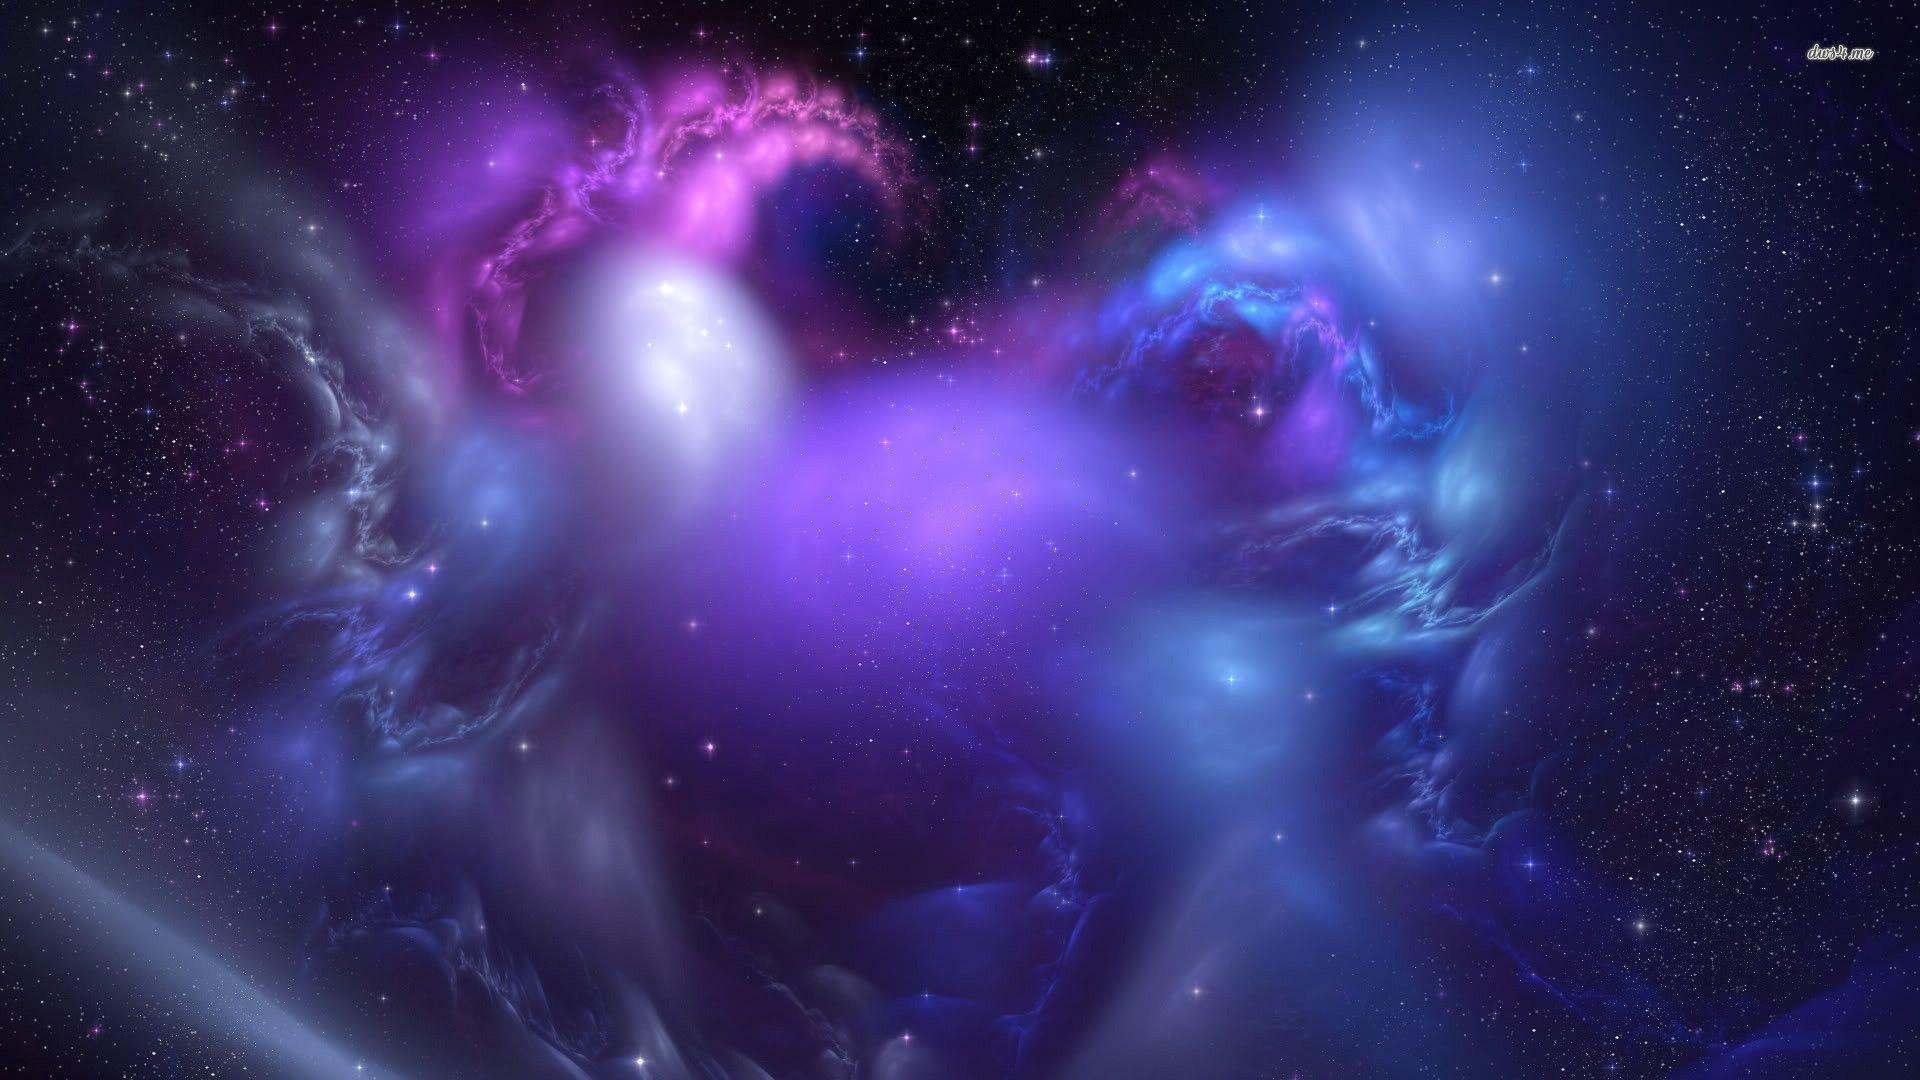 Purple Galaxy Wallpapers Wallpaper Cave